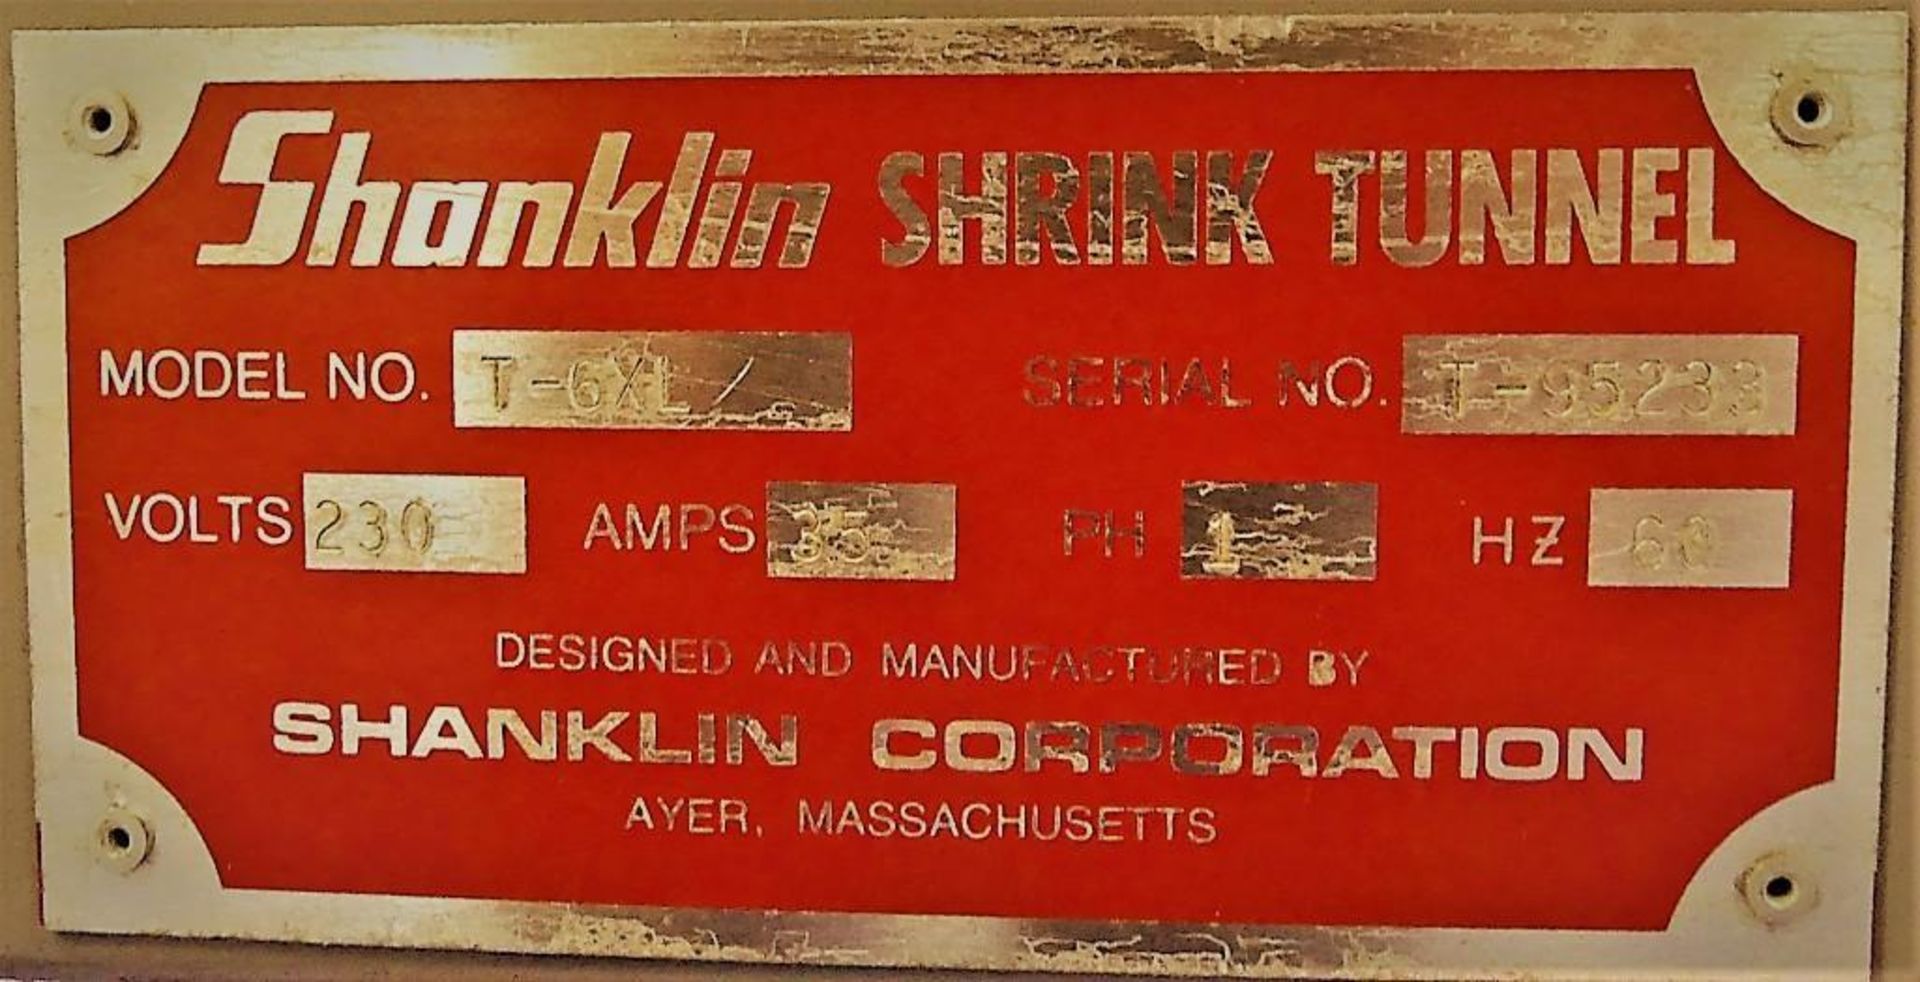 Shanklin T-6XL Heat Shrink Tunnel 18" Wide x 12" High - Image 5 of 5